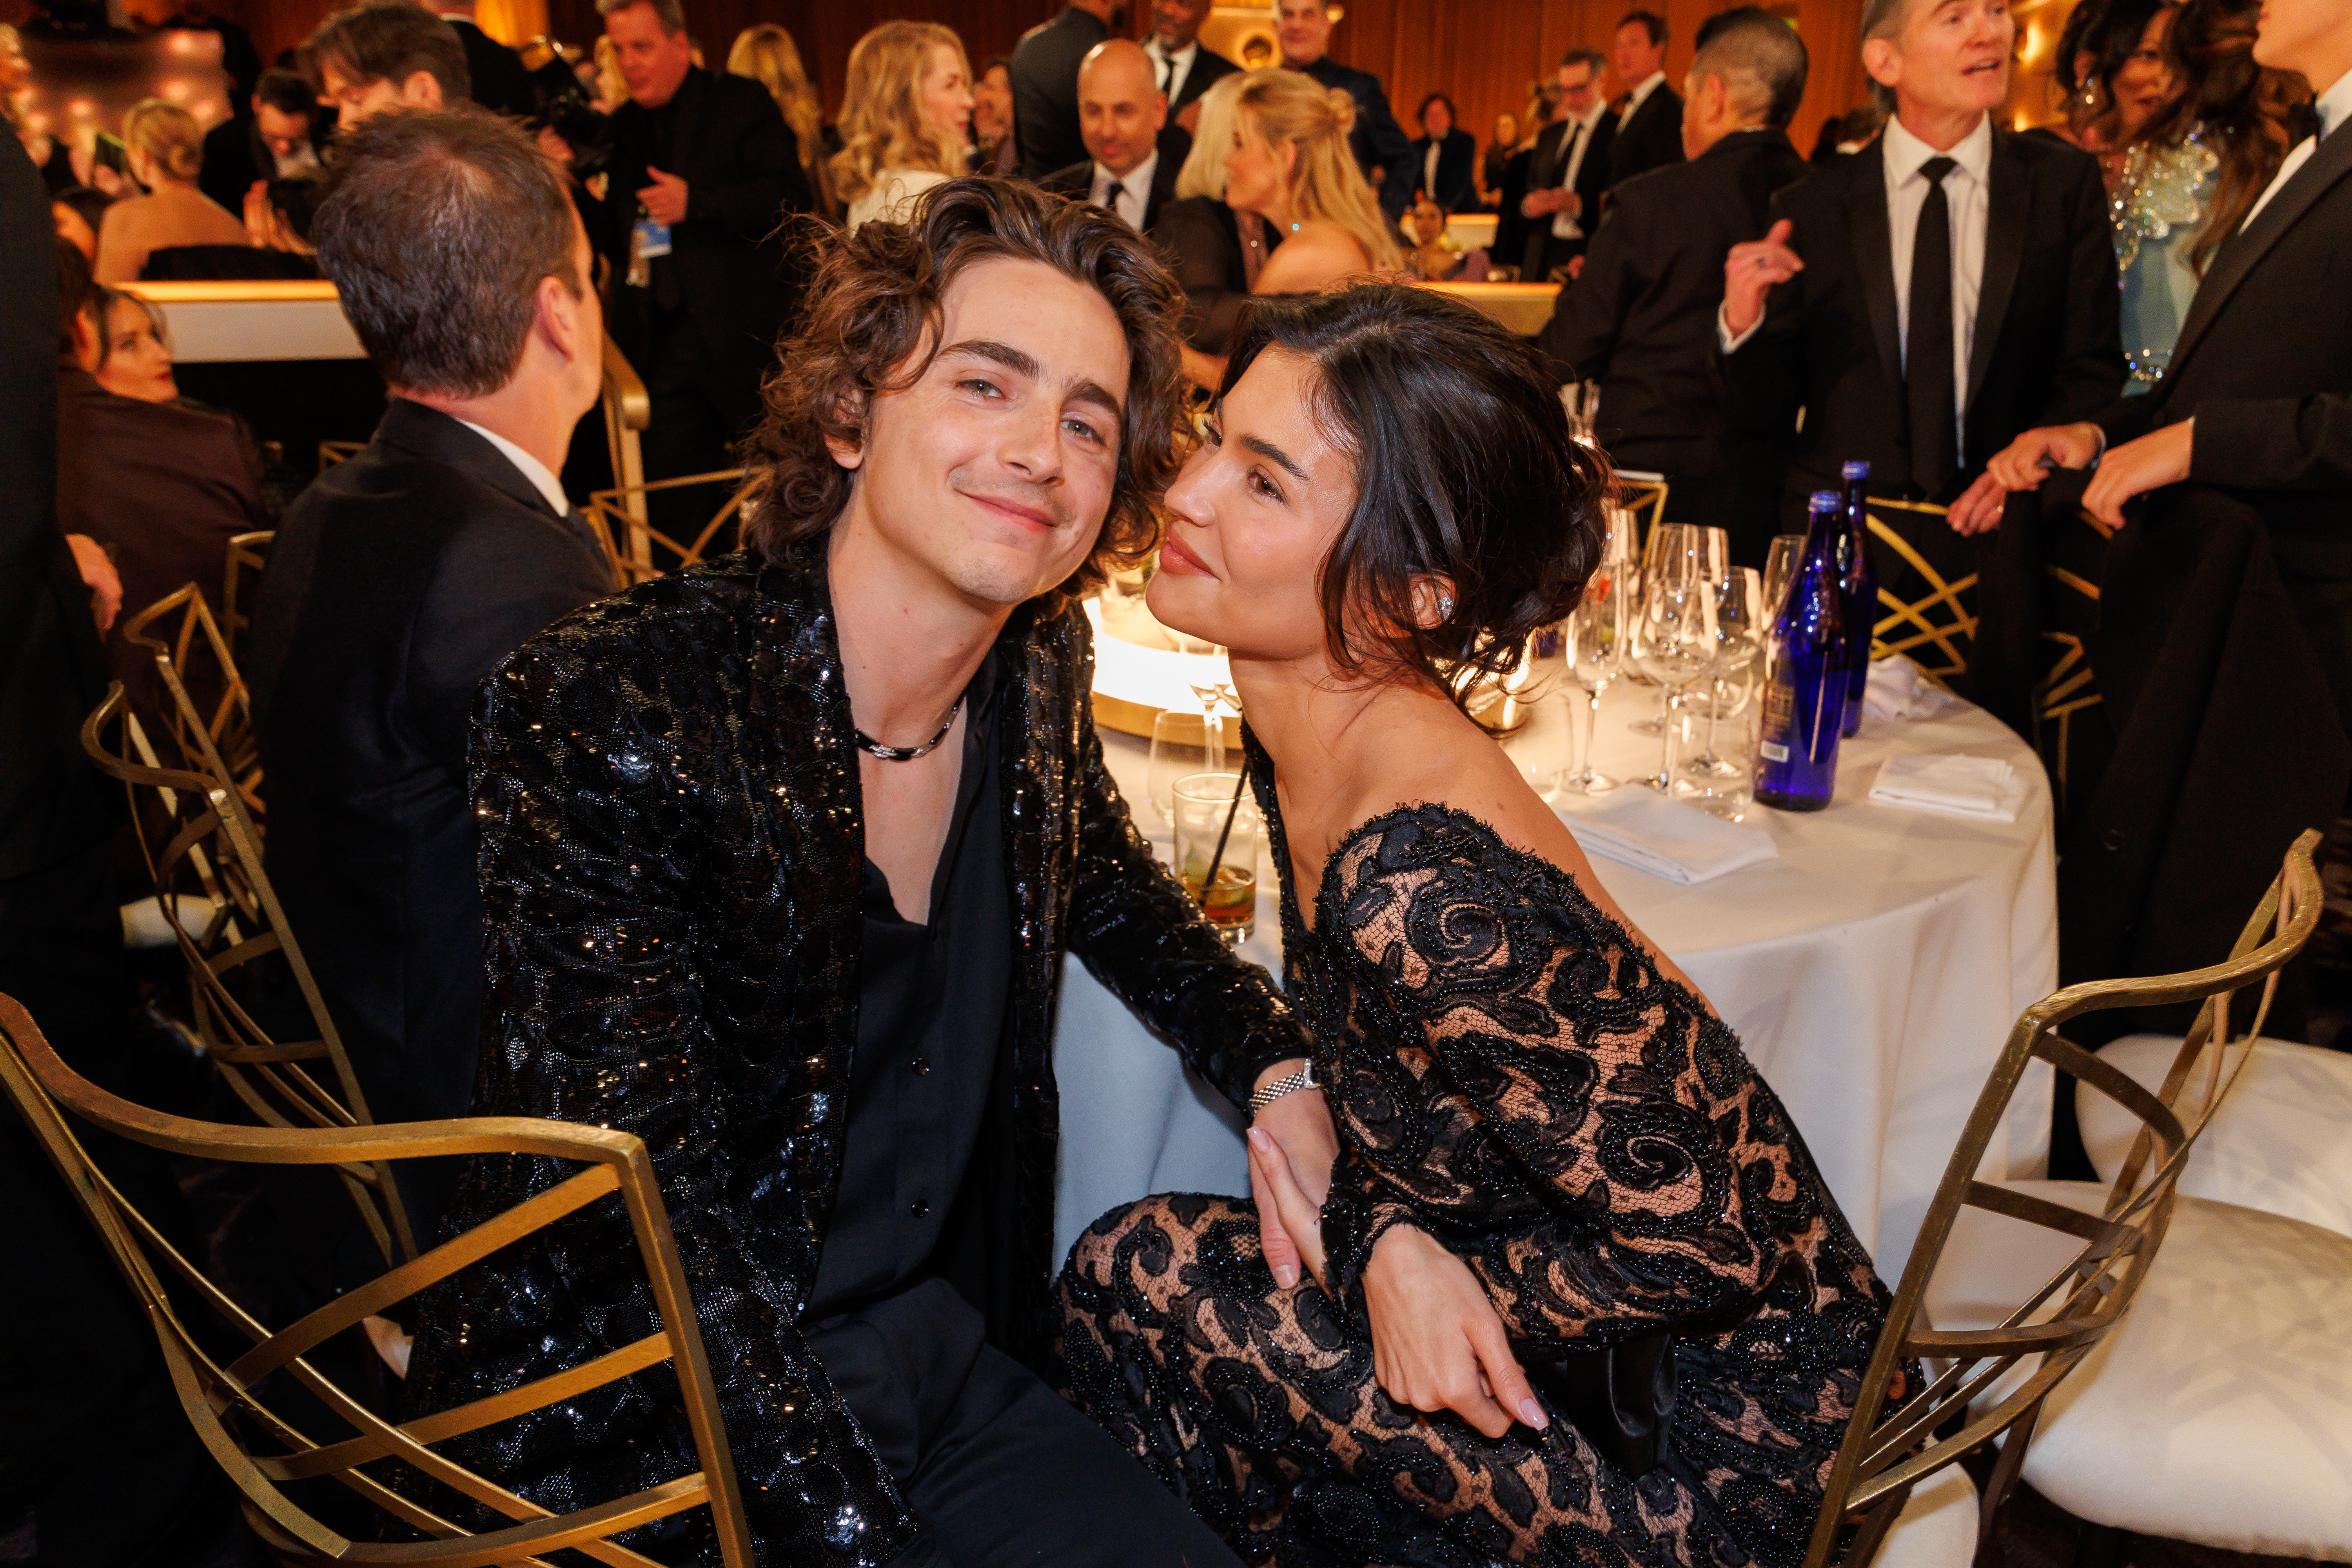 Kylie and Timothee posed together at the 2023 Golden Globes